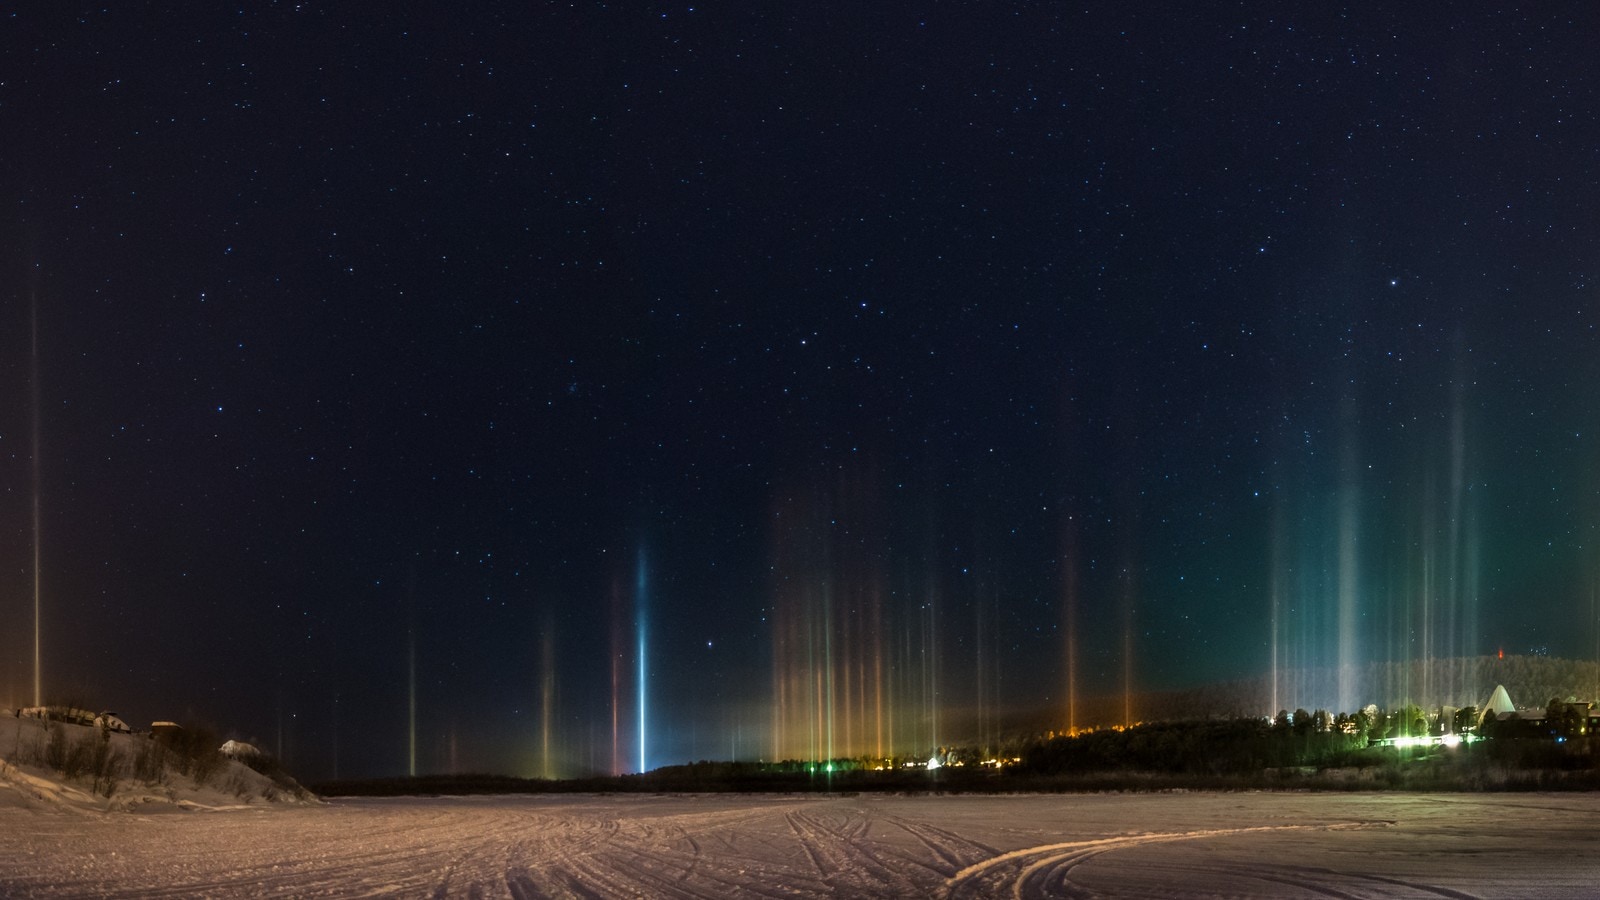 In the town of Karasjok in northern Norway, a spectacular show of light an color painted the night sky yesterday. 